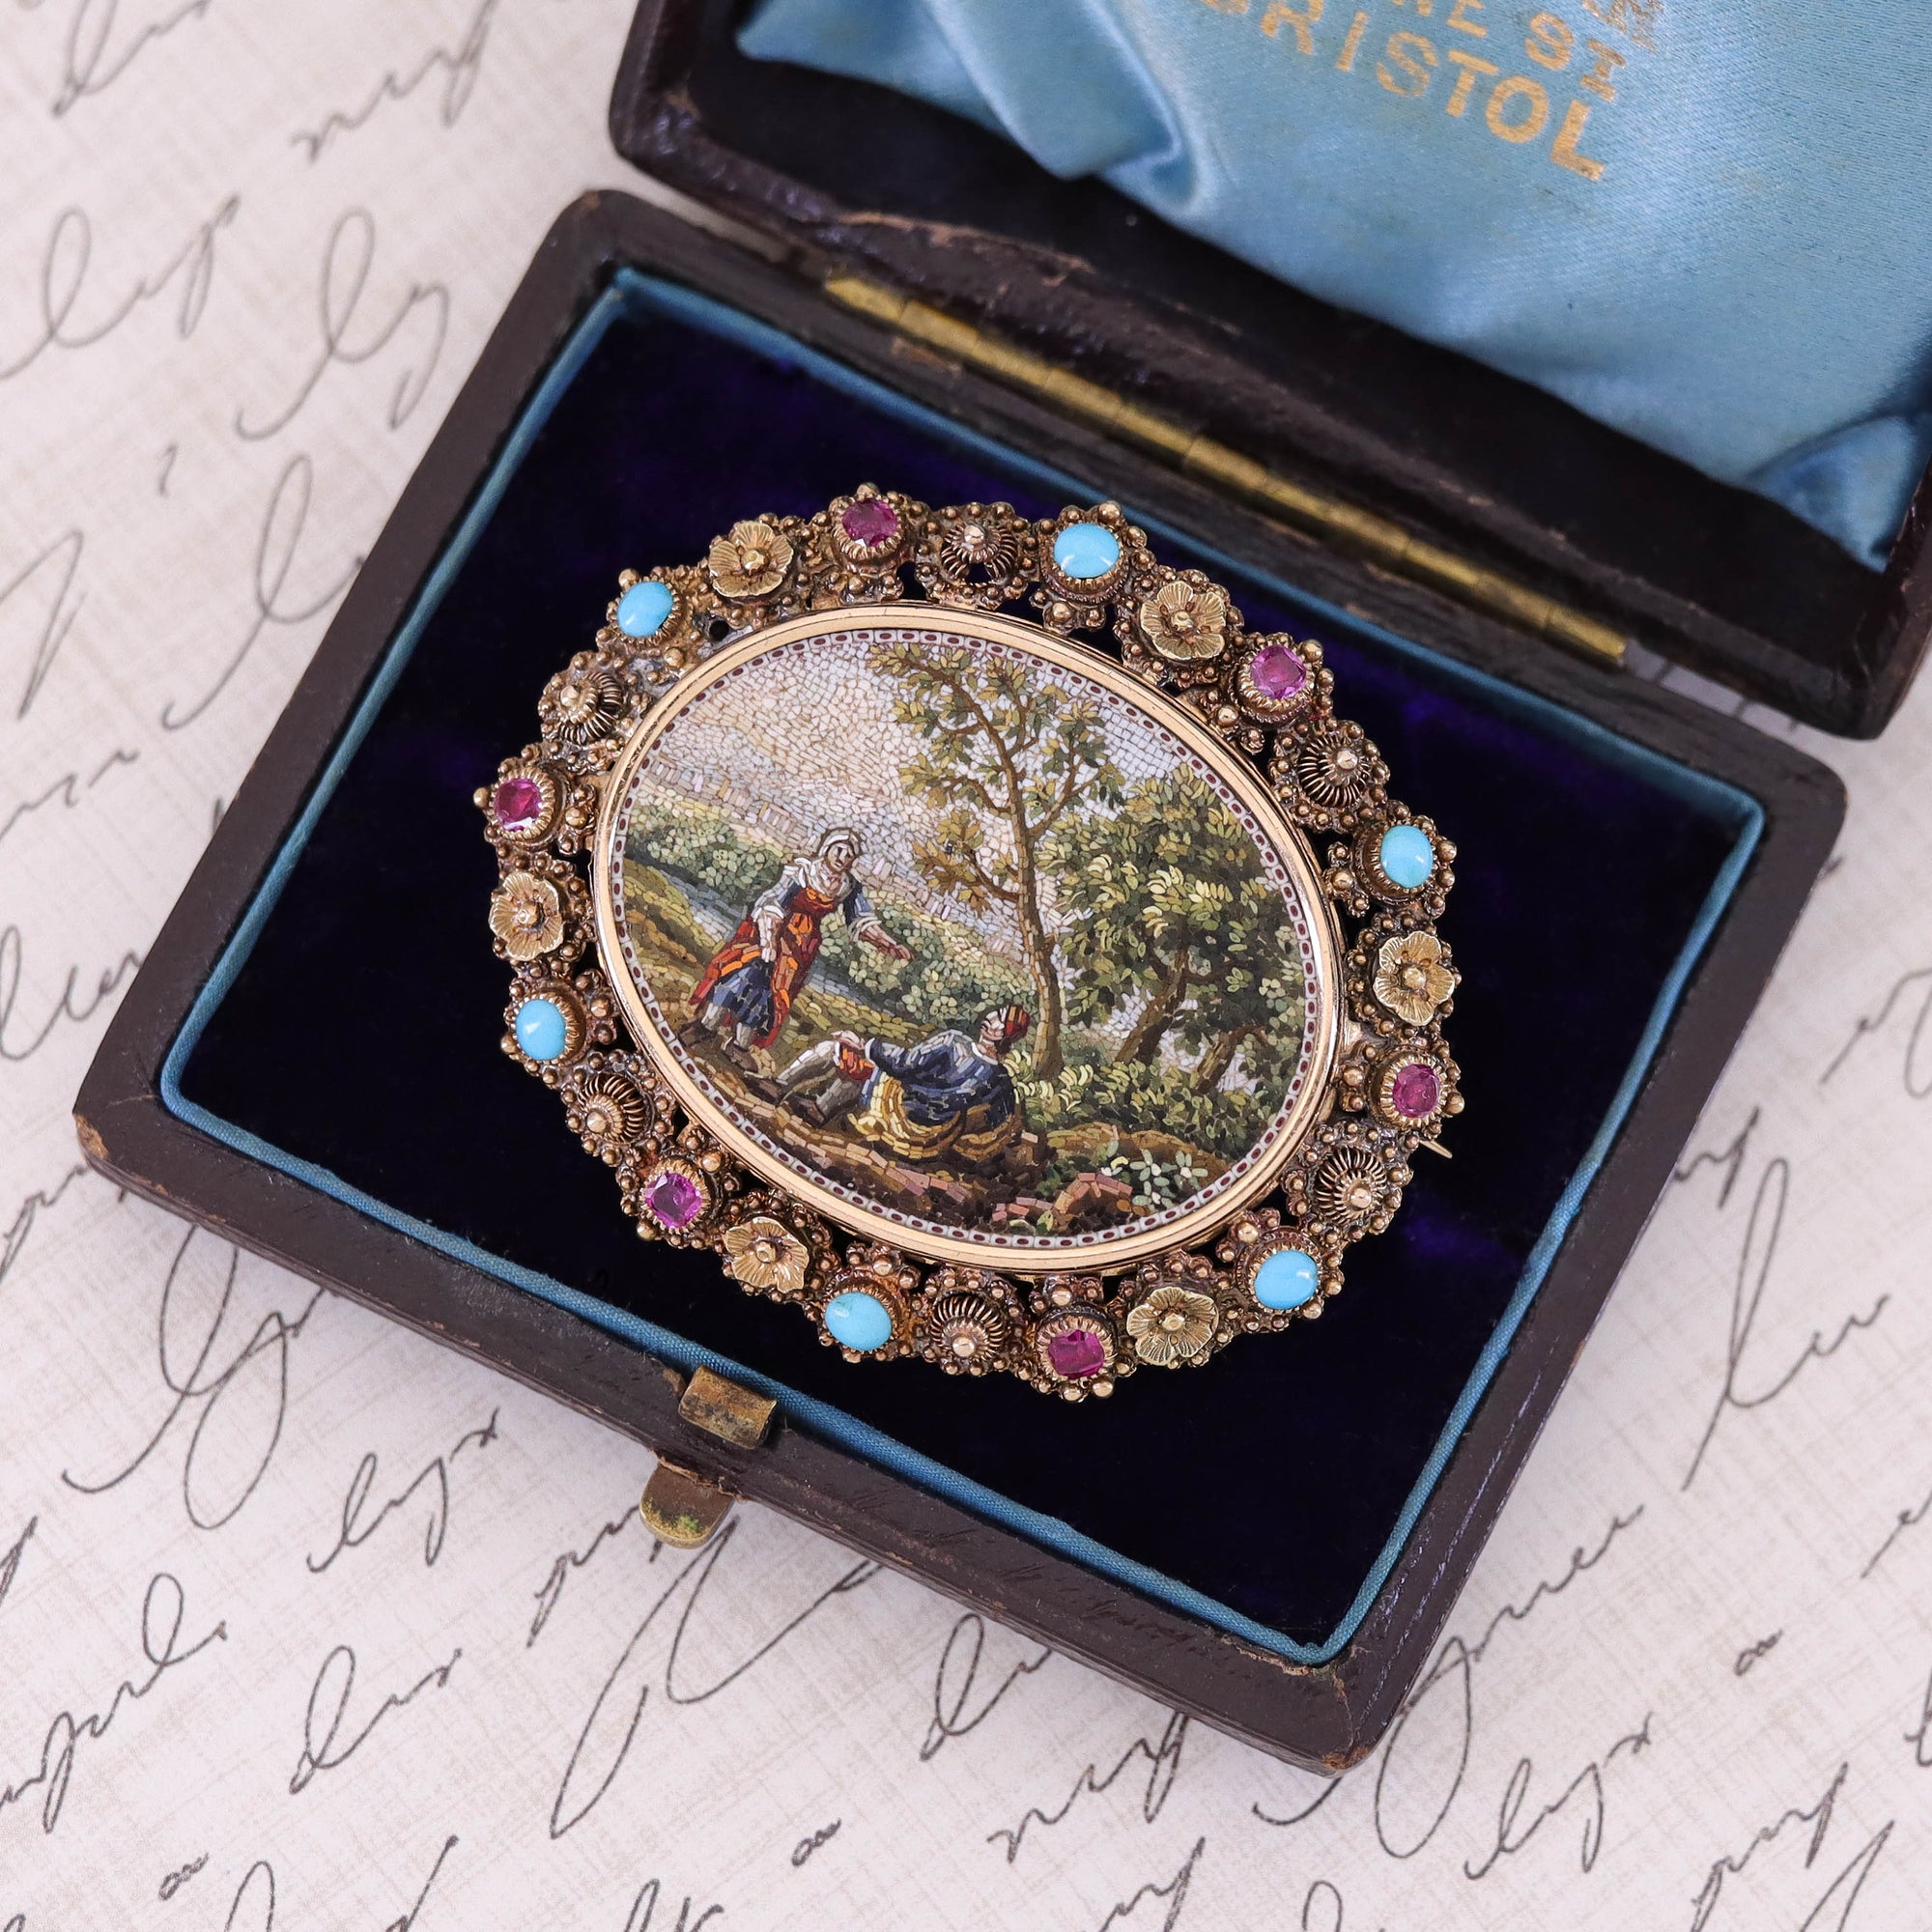 An exceptional micromosaic brooch (circa 1800) reminiscent of a fine renaissance era painting depicting a pasture seen of a man and woman under a tree.